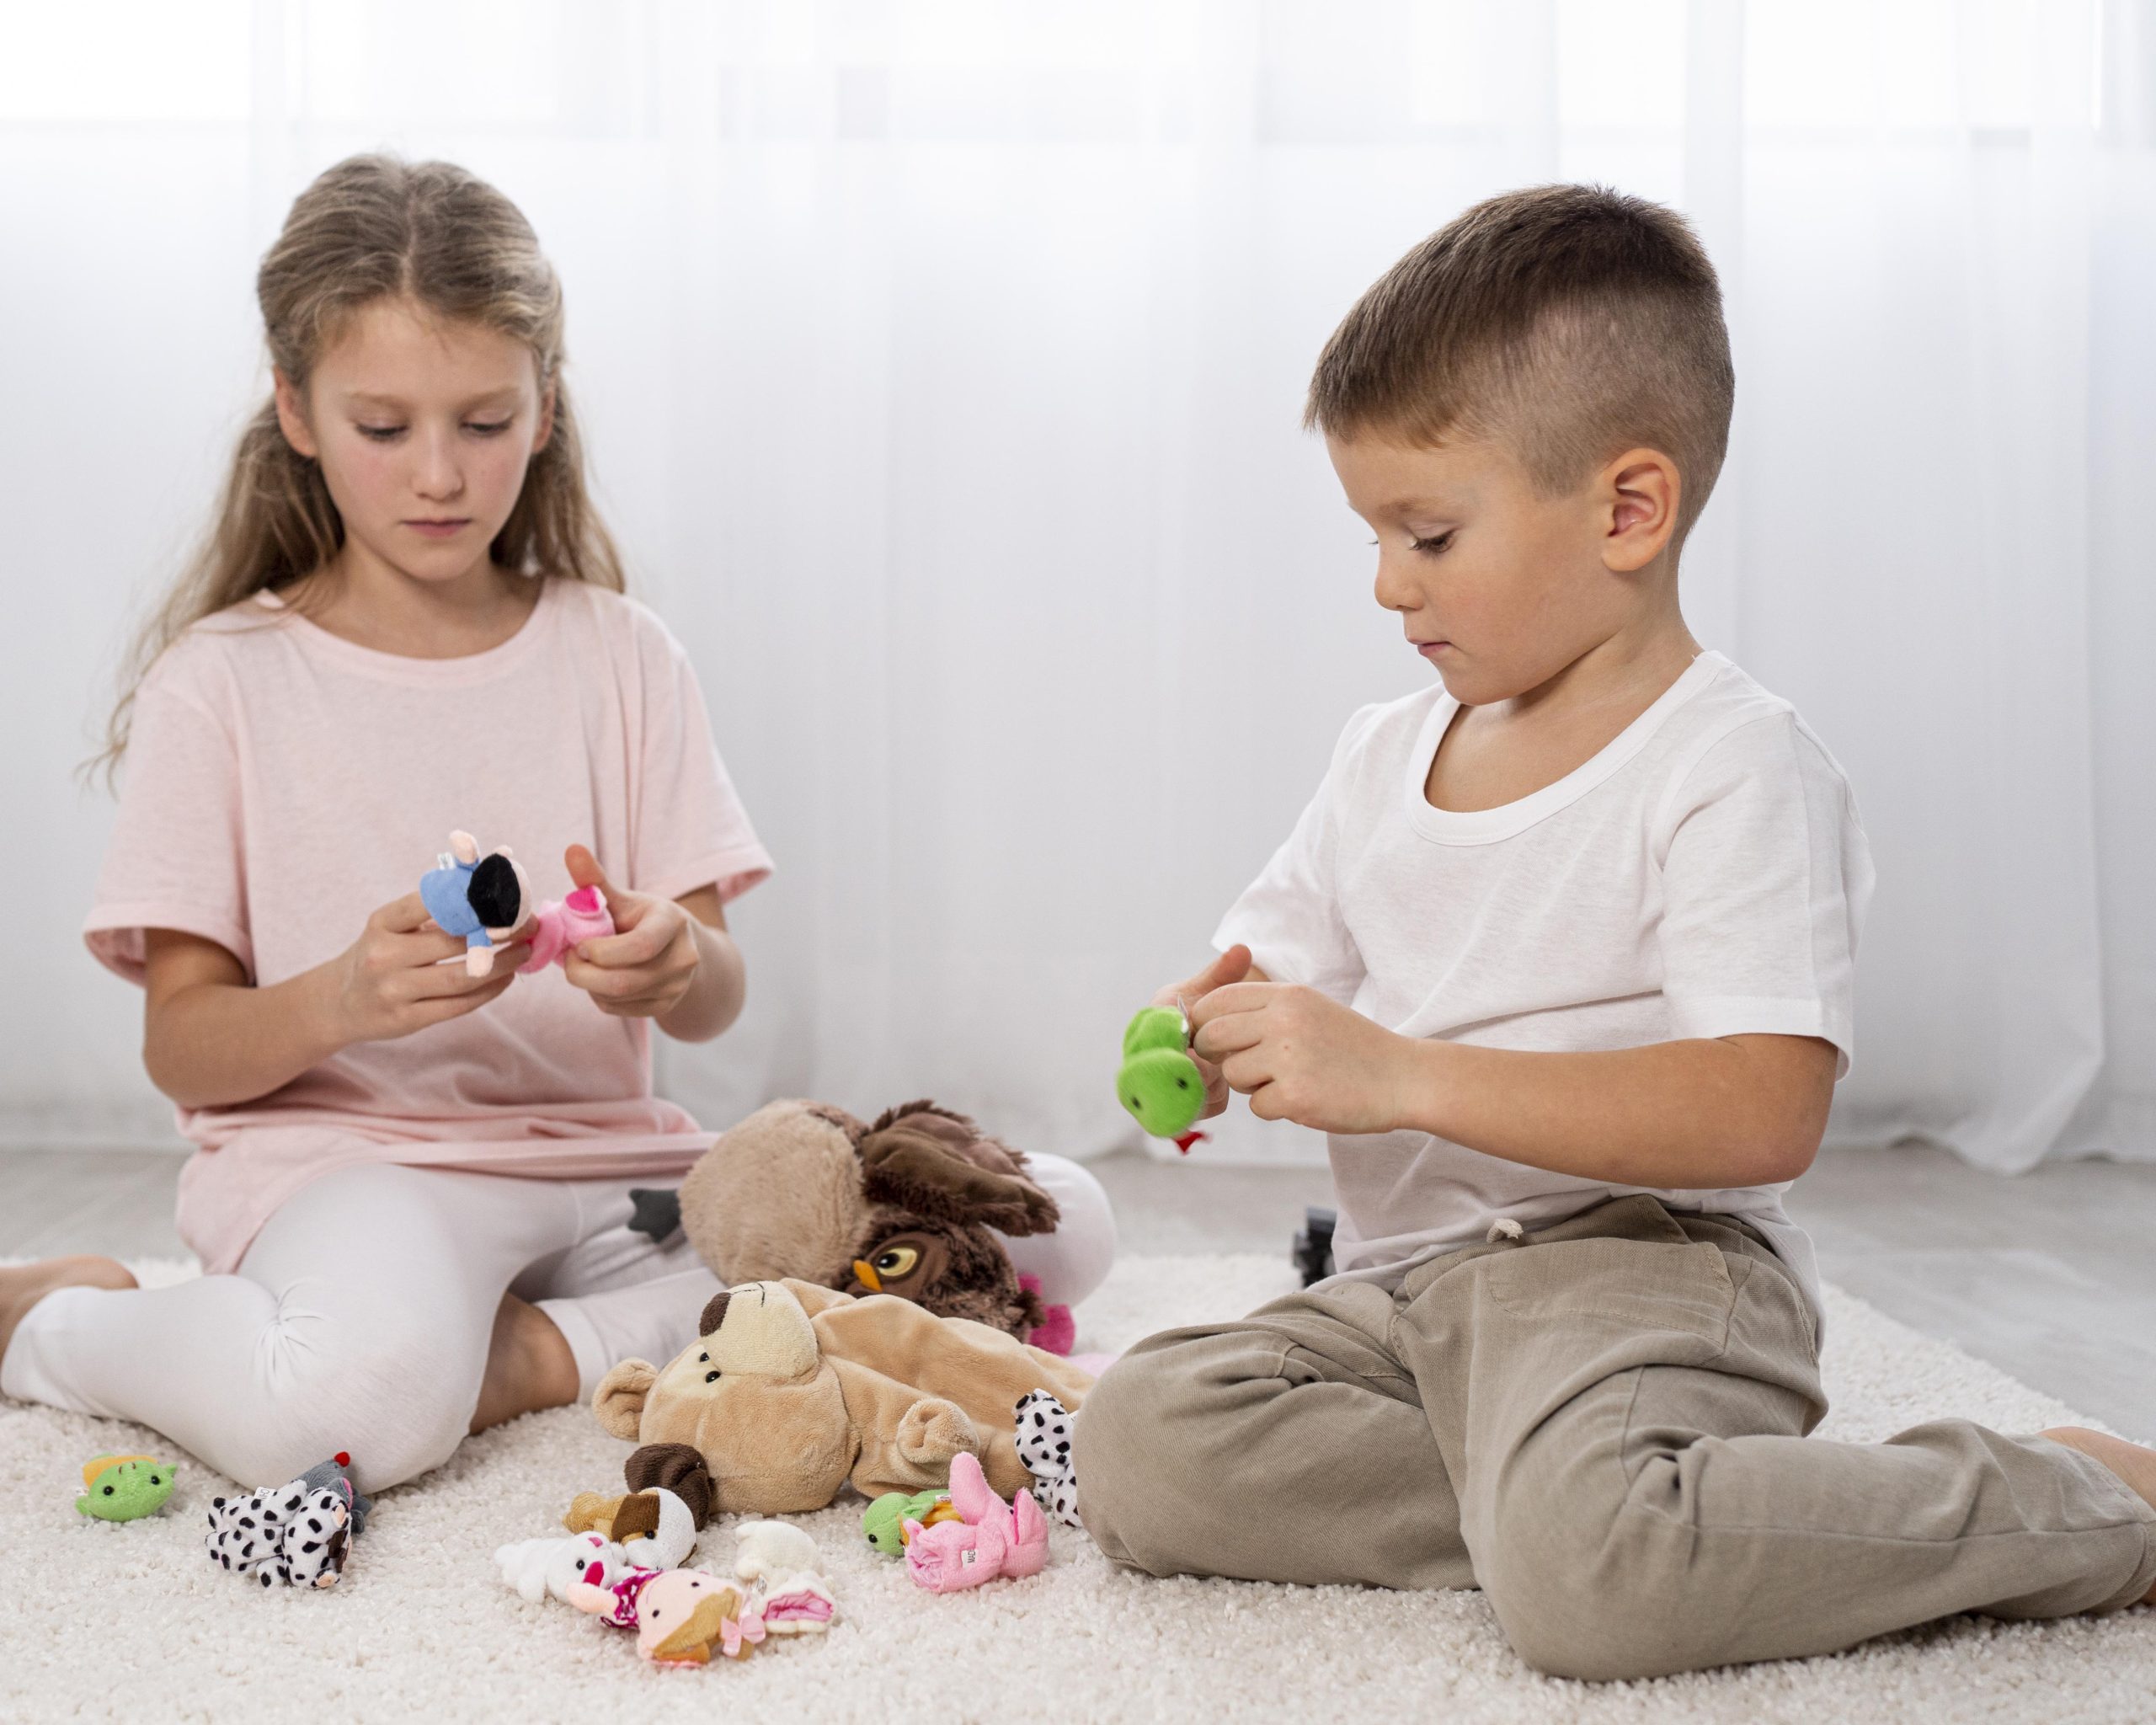 childrens learn using toys